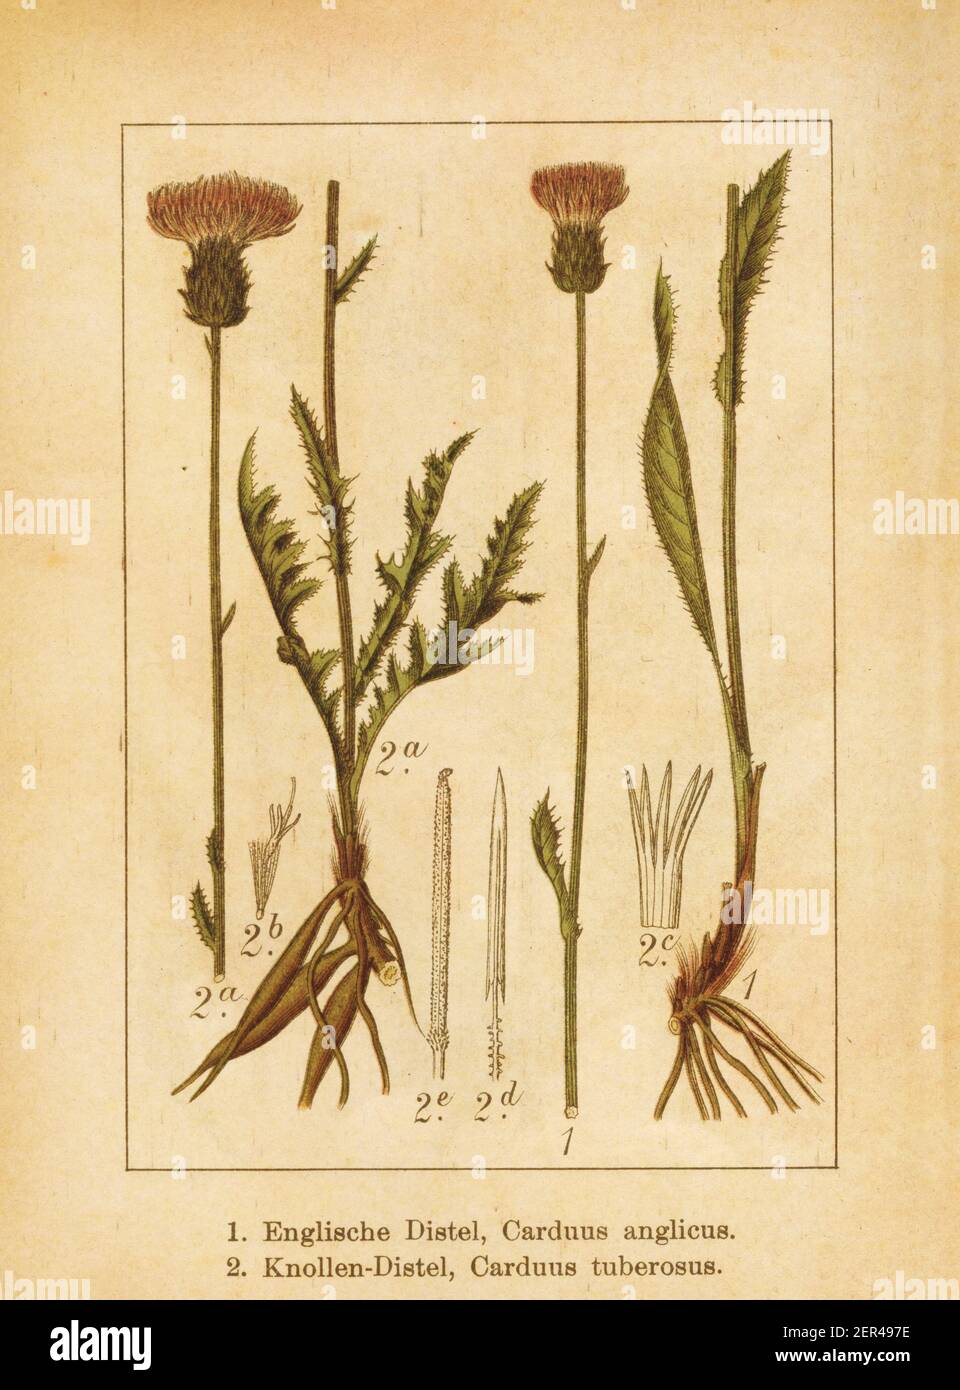 Antique illustration of a cirsium dissectum (also known as carduus anglicus or meadow thistle) and cirsium tuberosum (also known as carduus tuberosus Stock Photo